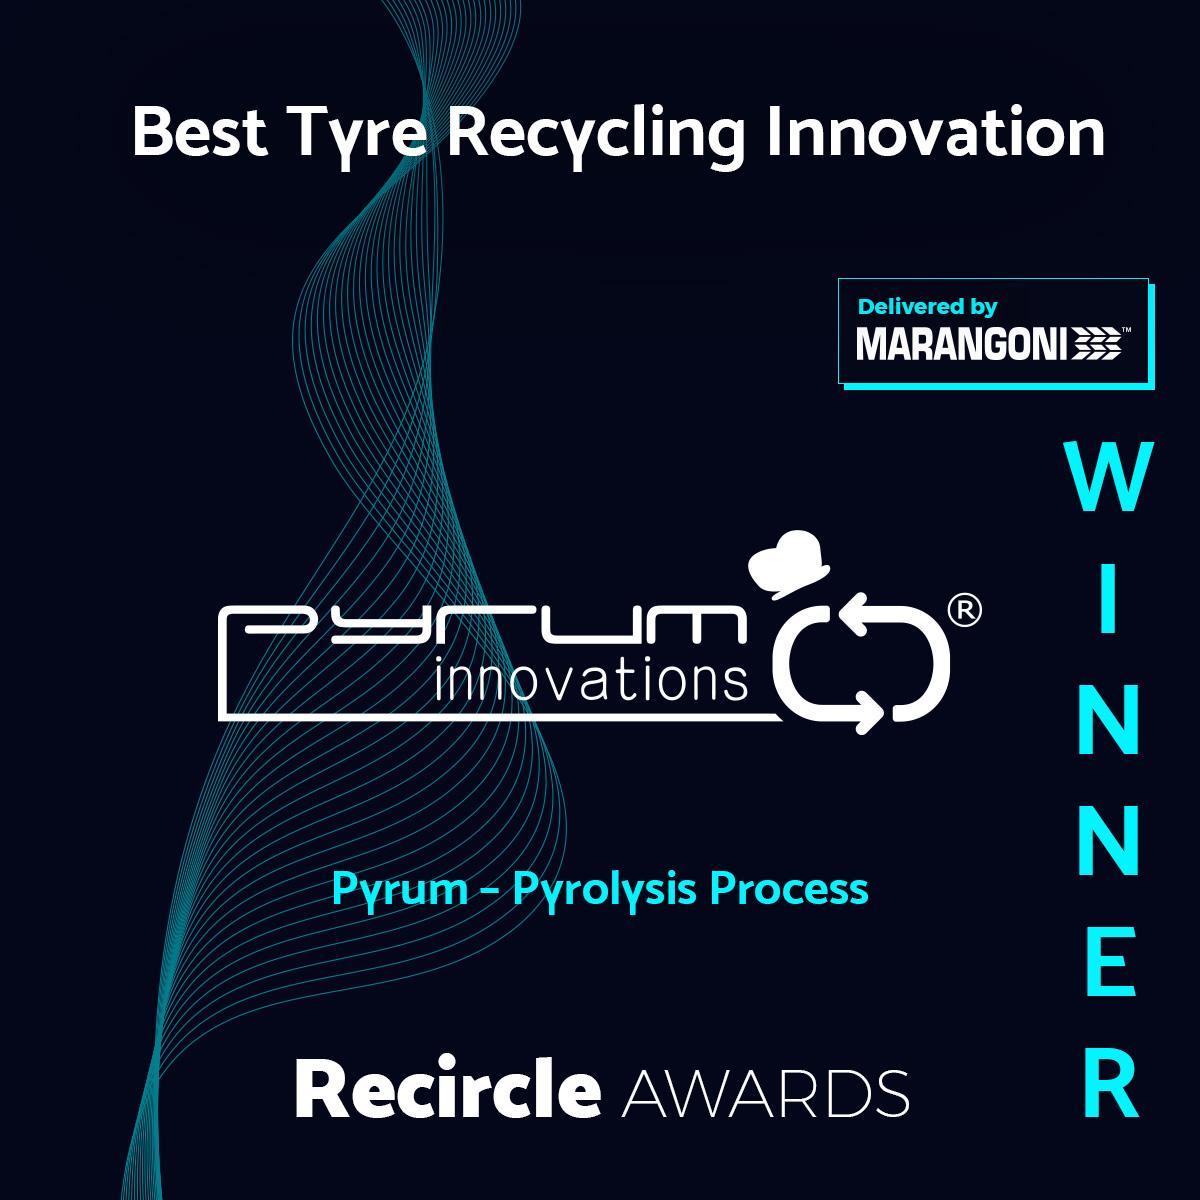 Best Tyre Recycling Innovation 21